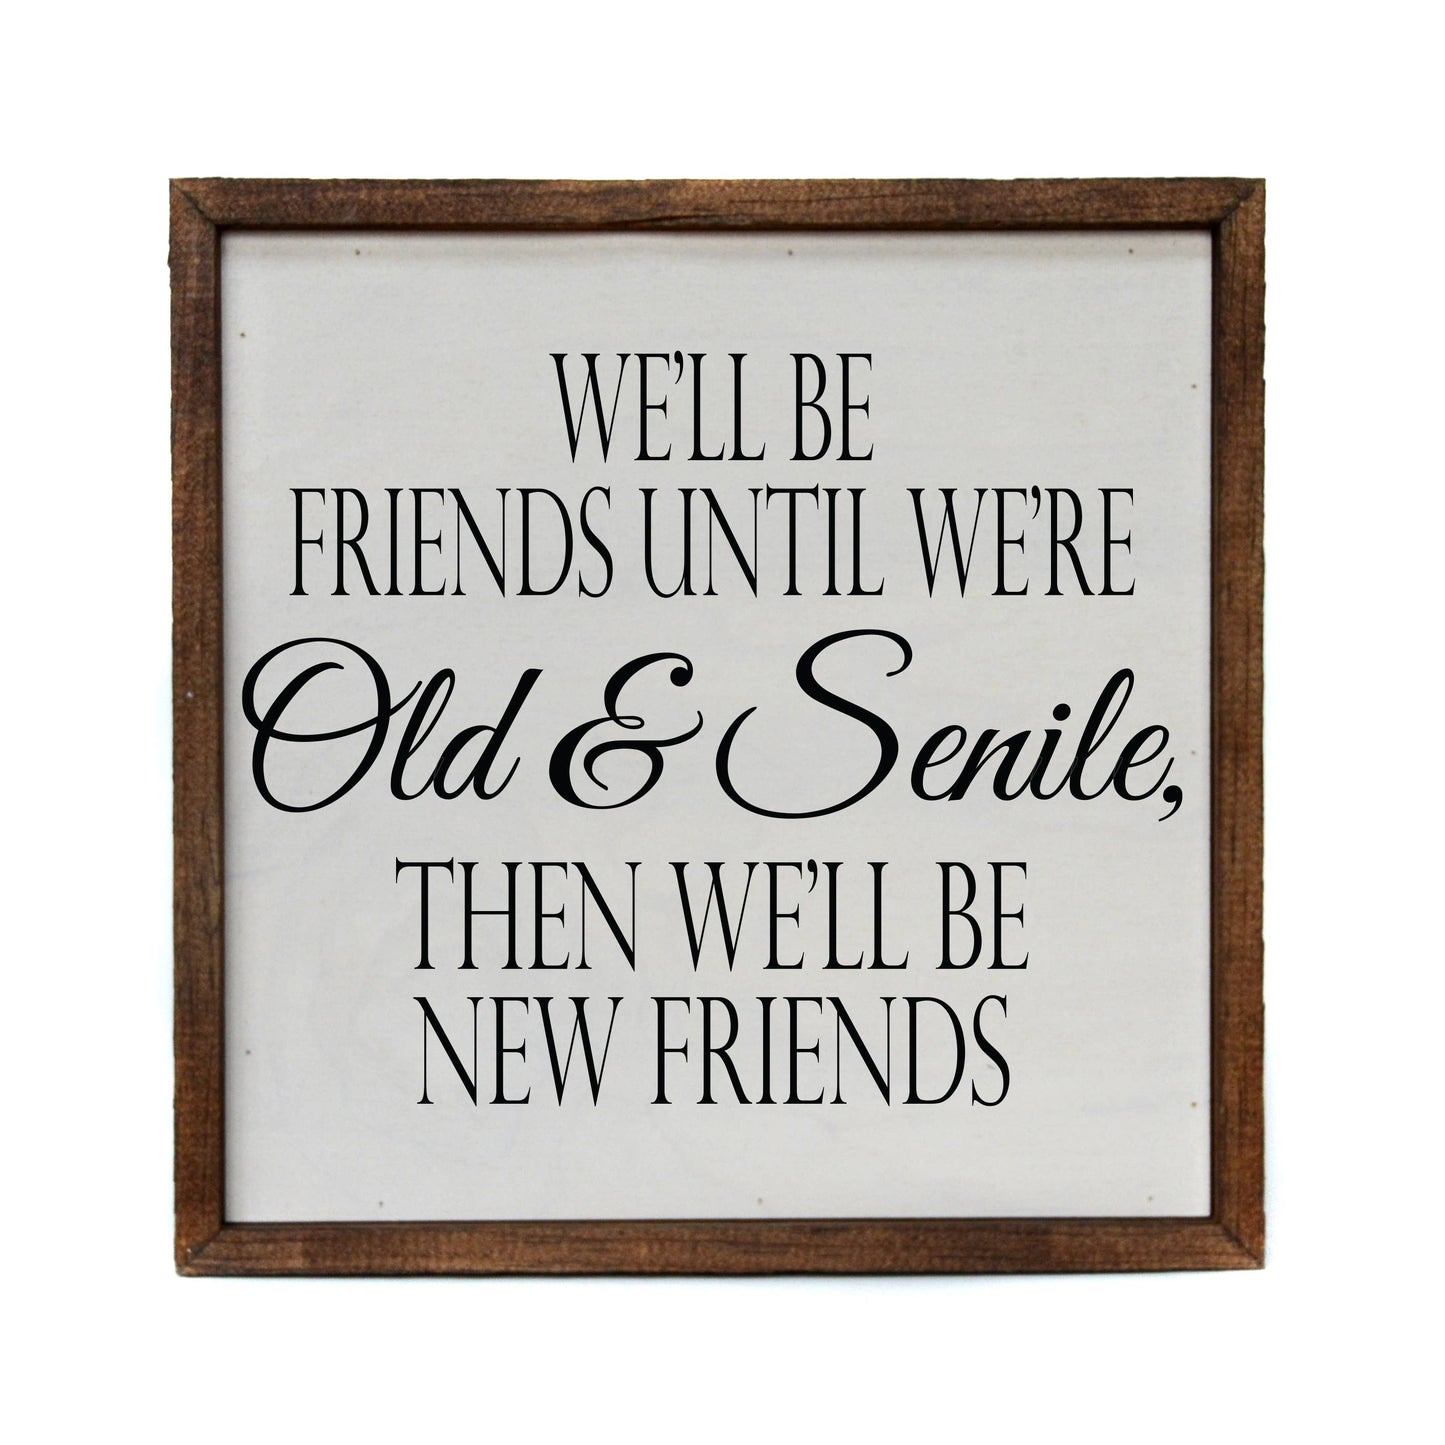 We'll be friends until we're Old & Senile Then we'll be new friends Funny Wood 10x10 Sign